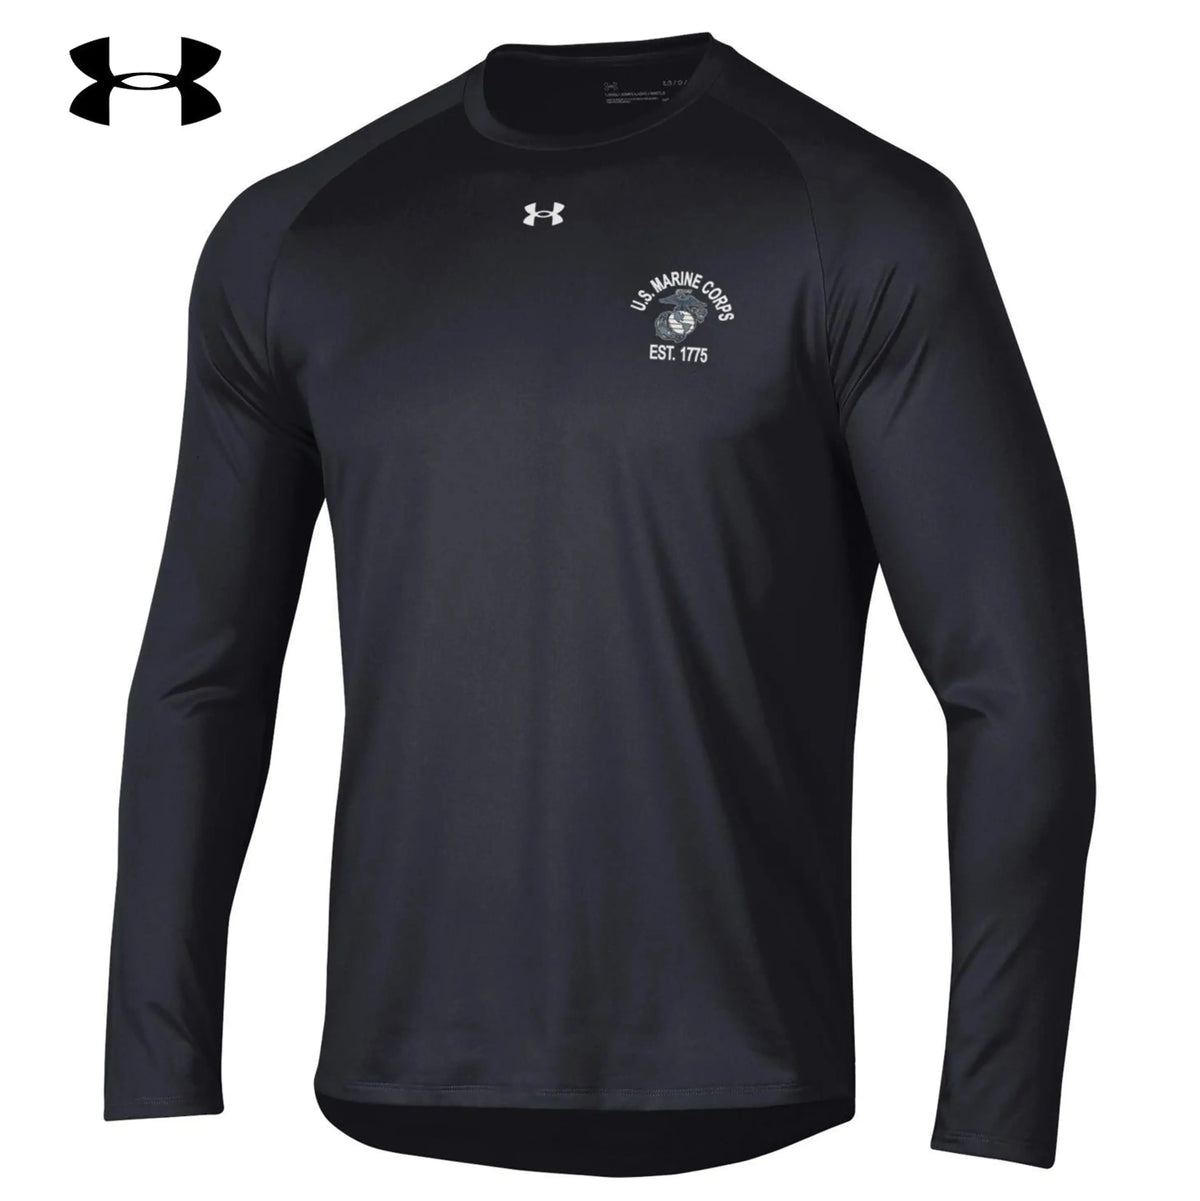 Closeout Under Armour EST. 1775 Chest Seal Tech Performance Long Sleeve Tee (3XL Only)